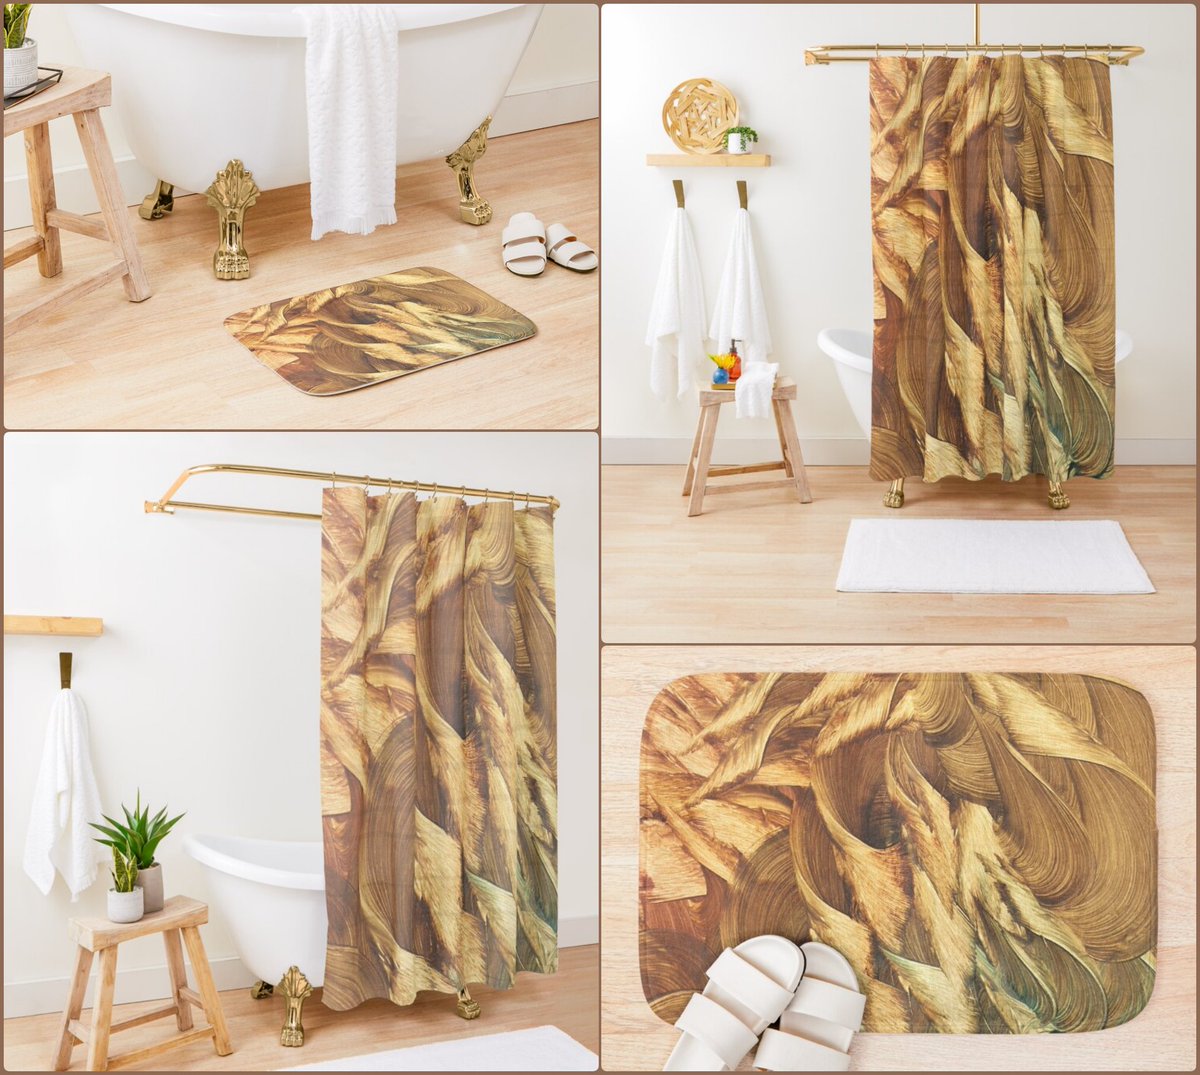 Glorious Beholder Shower Curtain~by Art Falaxy ~Charming Decor~ #accents #homedecor #art #artfalaxy #bathmats #blankets #comforters #duvets #pillows #redbubble #shower #trendy #modern #gifts #FindYourThing #brown #beige redbubble.com/i/shower-curta…